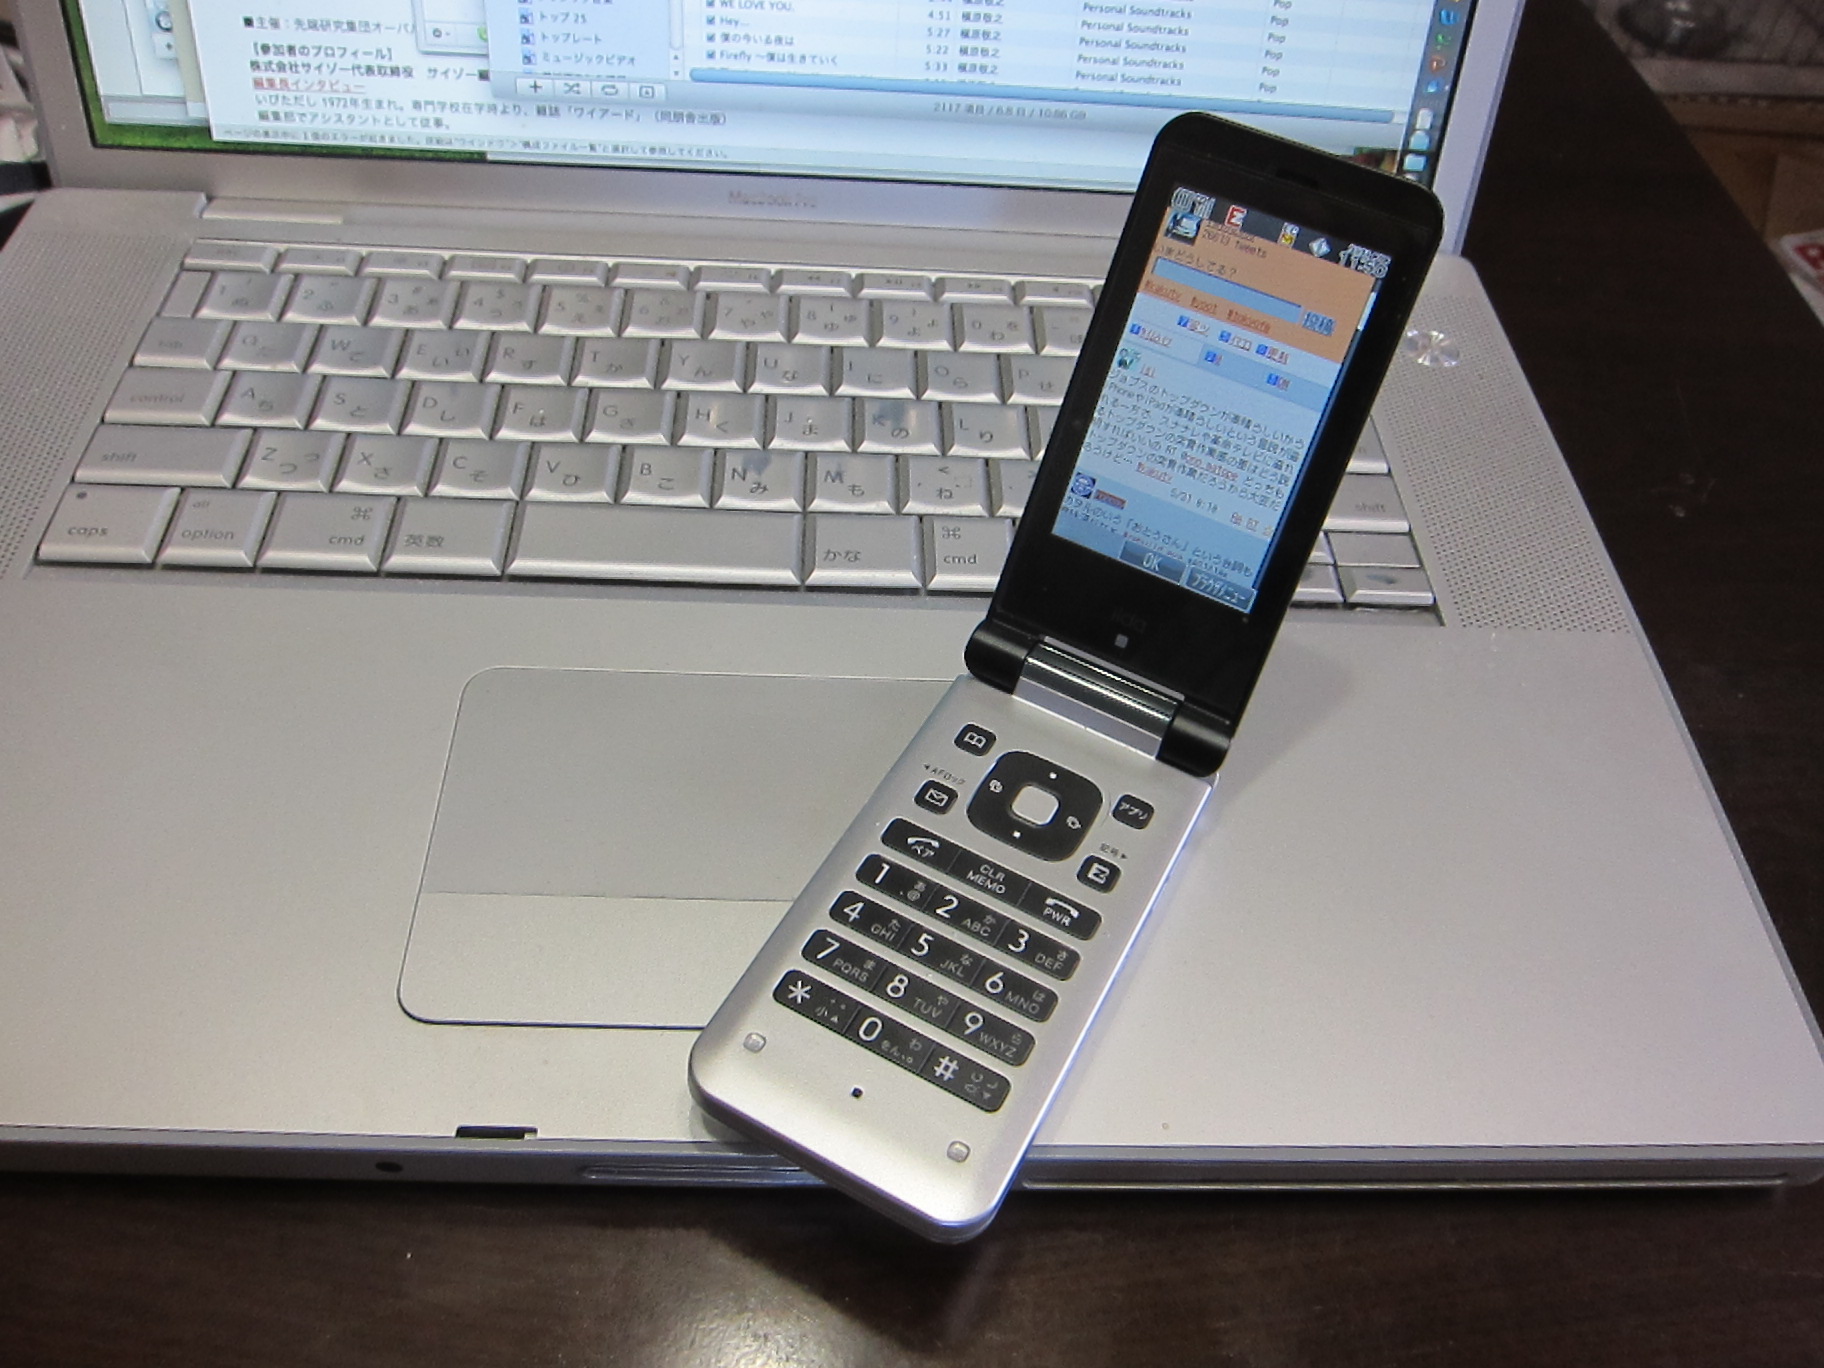 cellphone hooked to laptop, with open screen displaying keyboard